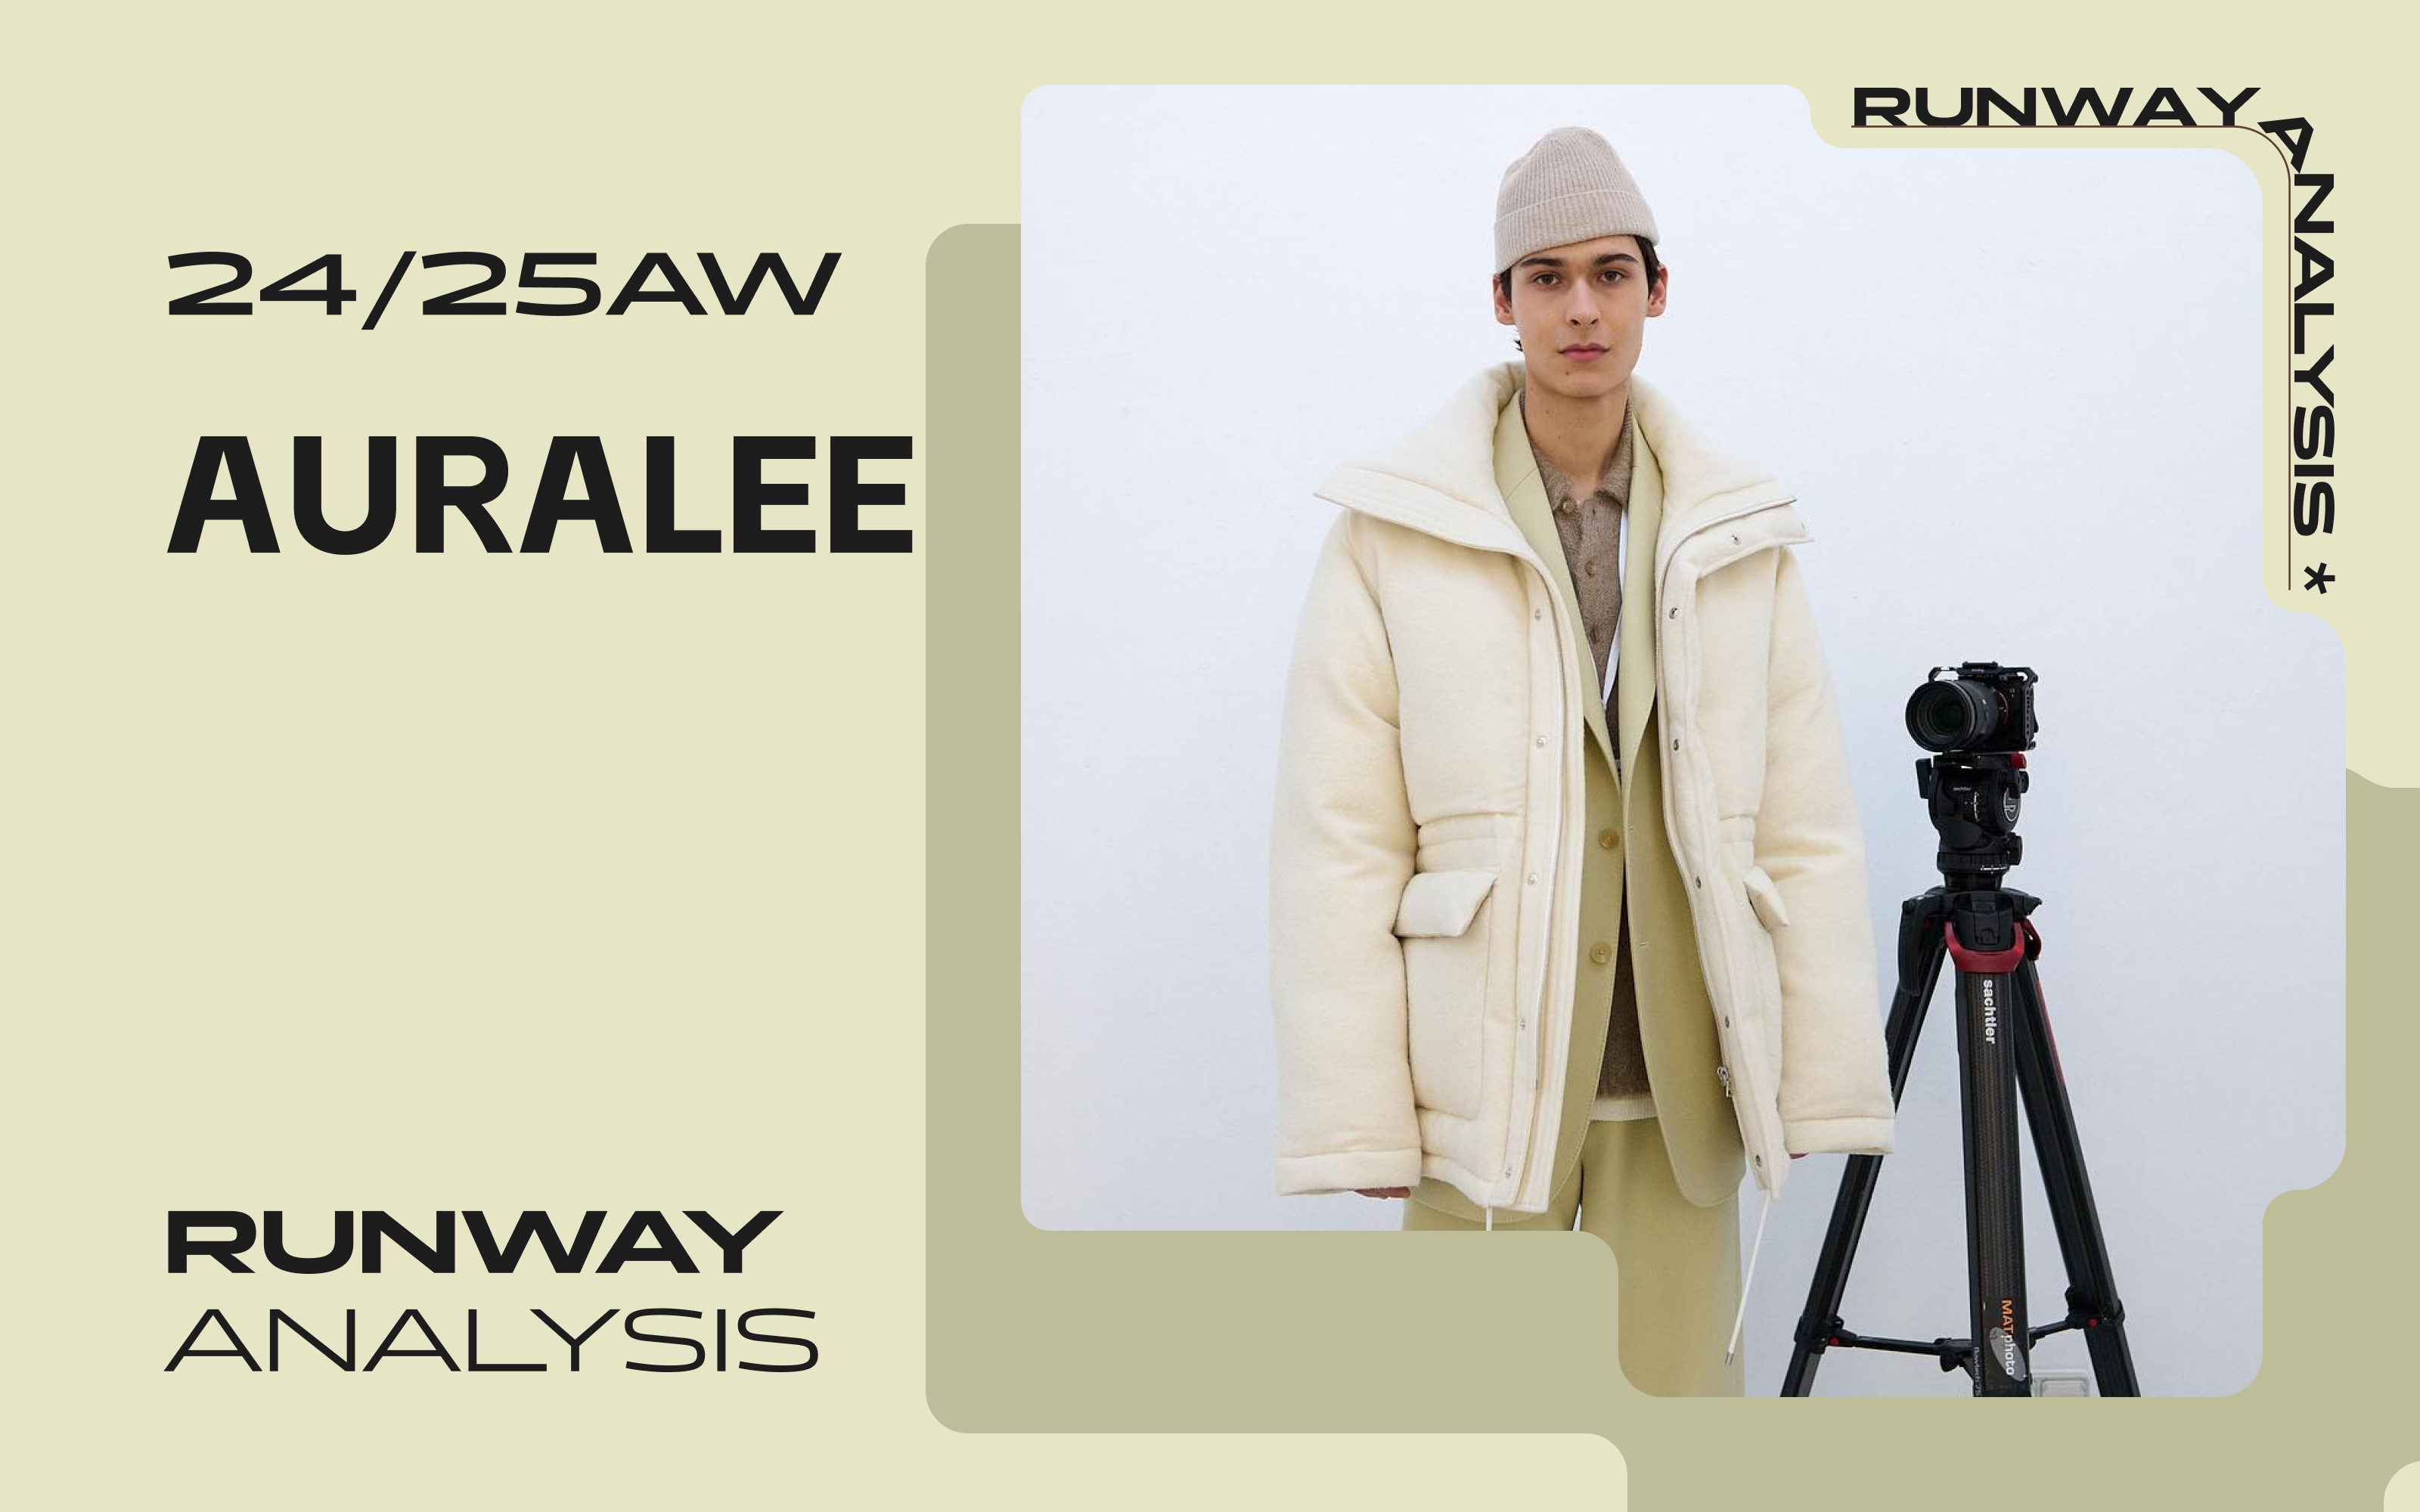 From Formal to Casual -- The Men's Runway Analysis of AURALEE